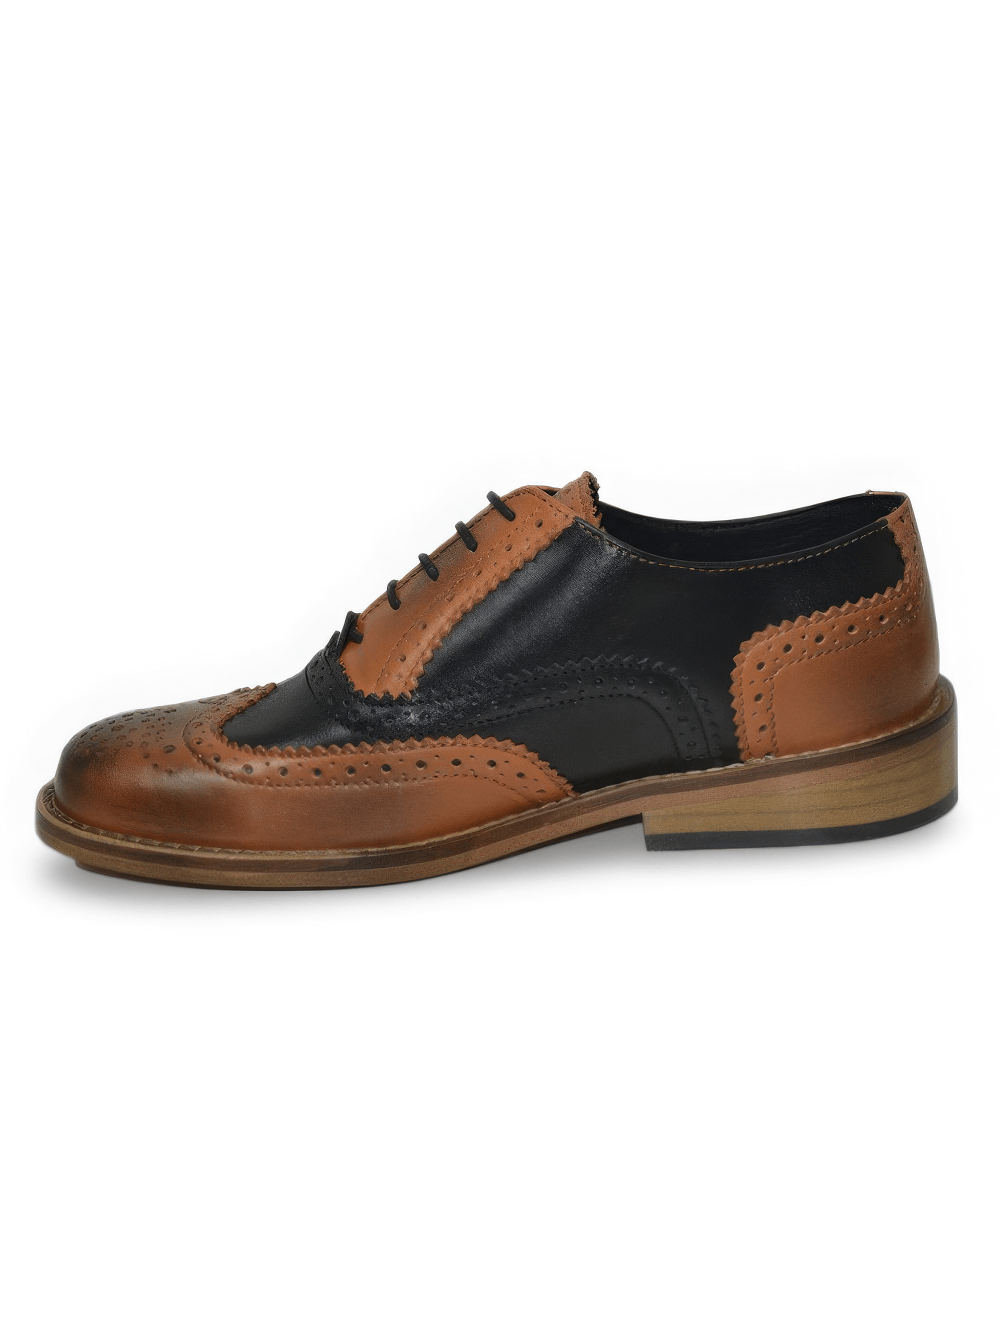 Lace-Up Oxford Shoes in Brown and Black Leather